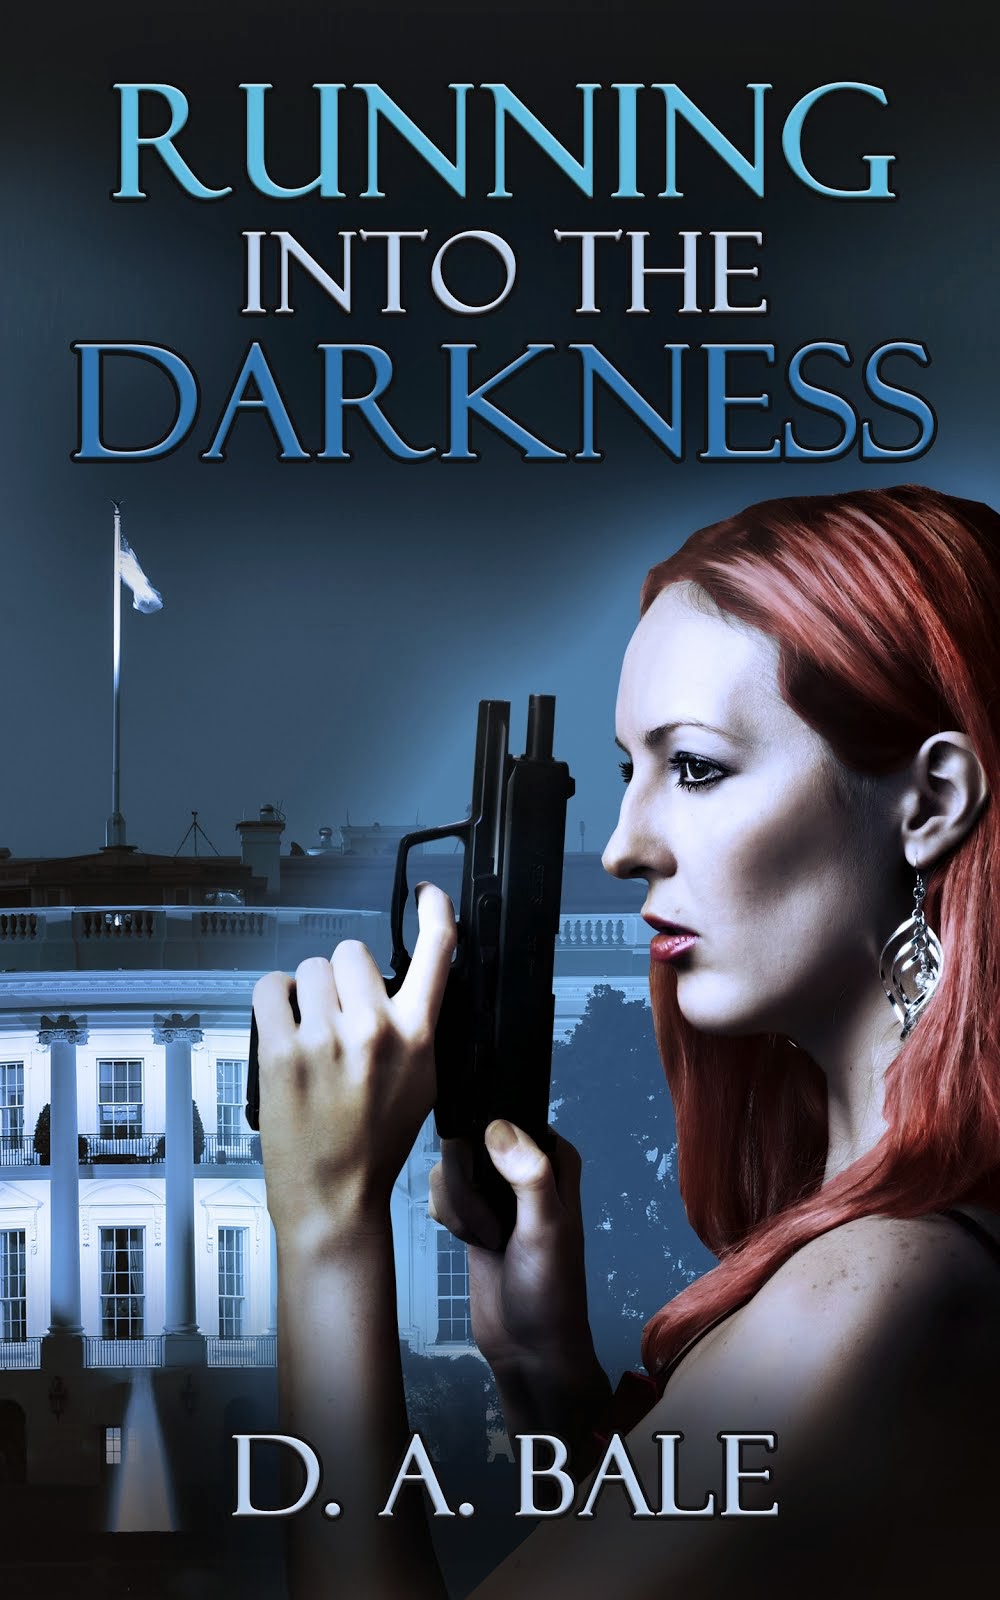 FREE Running into the Darkness eBook on Amazon